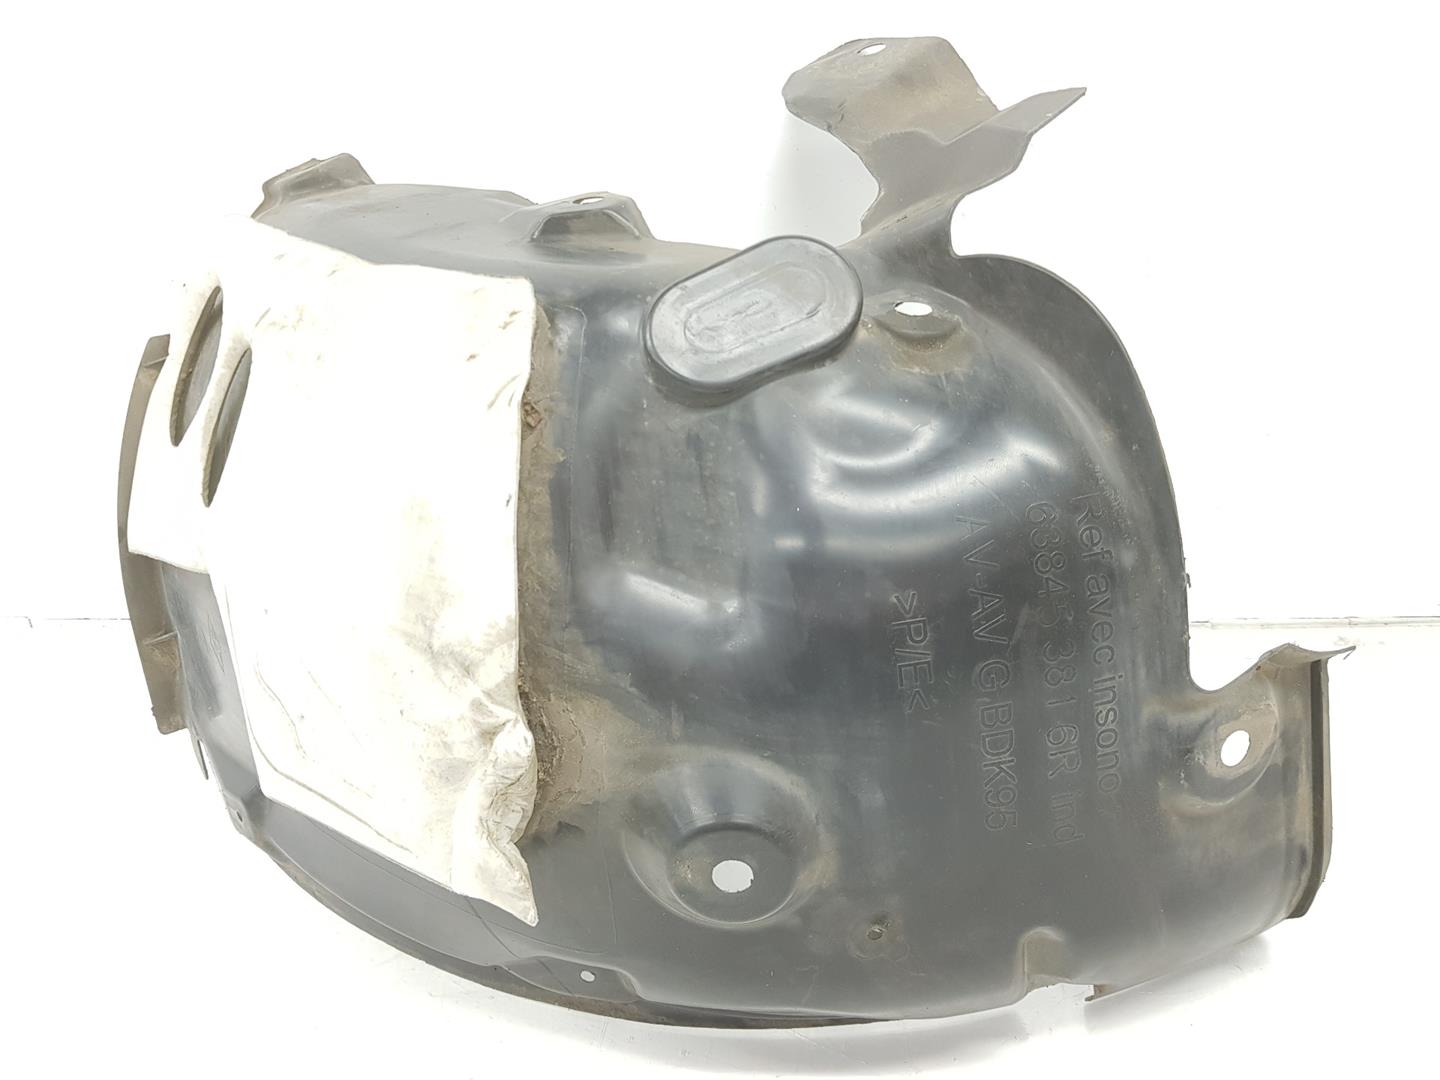 RENAULT Megane 3 generation (2008-2020) Other Body Parts 638430101R, 638453816R 21079252